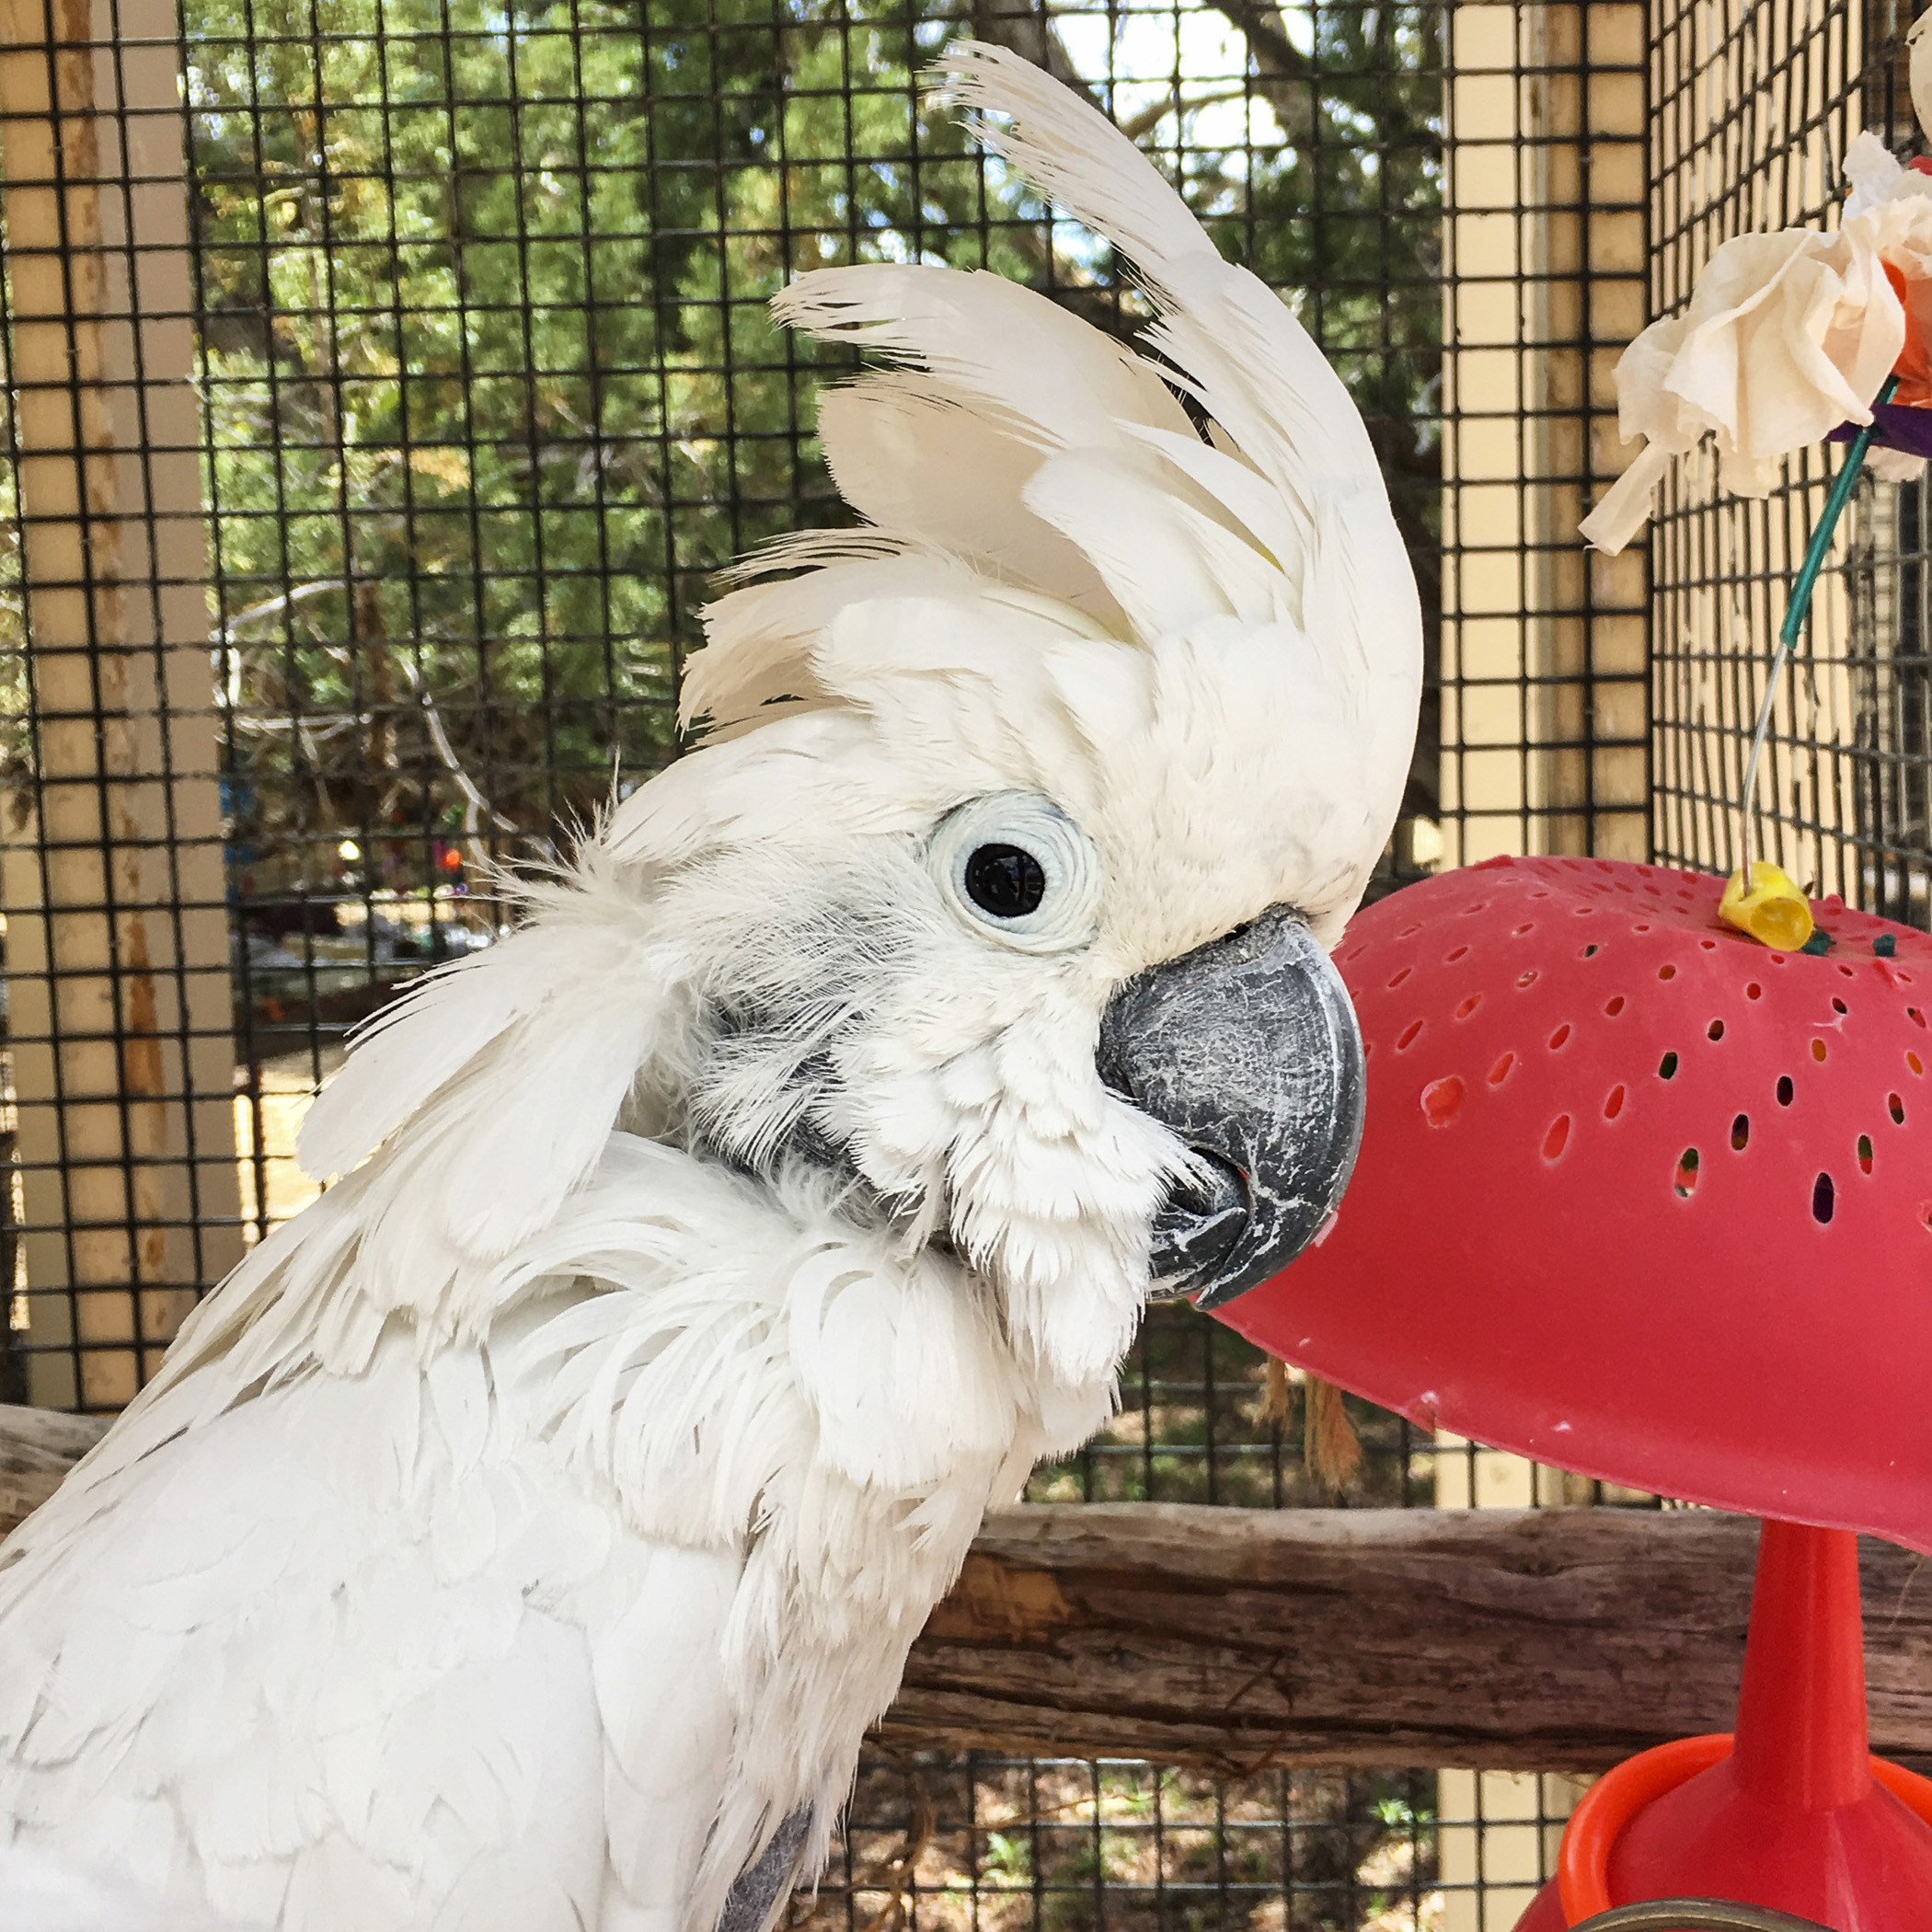  Mommy &amp; Daddy spent some of their volunteer time giving showers…to keep the parrots cool in the heat of the day. Some of them loved the showers, and would dance and move…others tried to stay in the very back, hoping the mist of the spray wouldn’